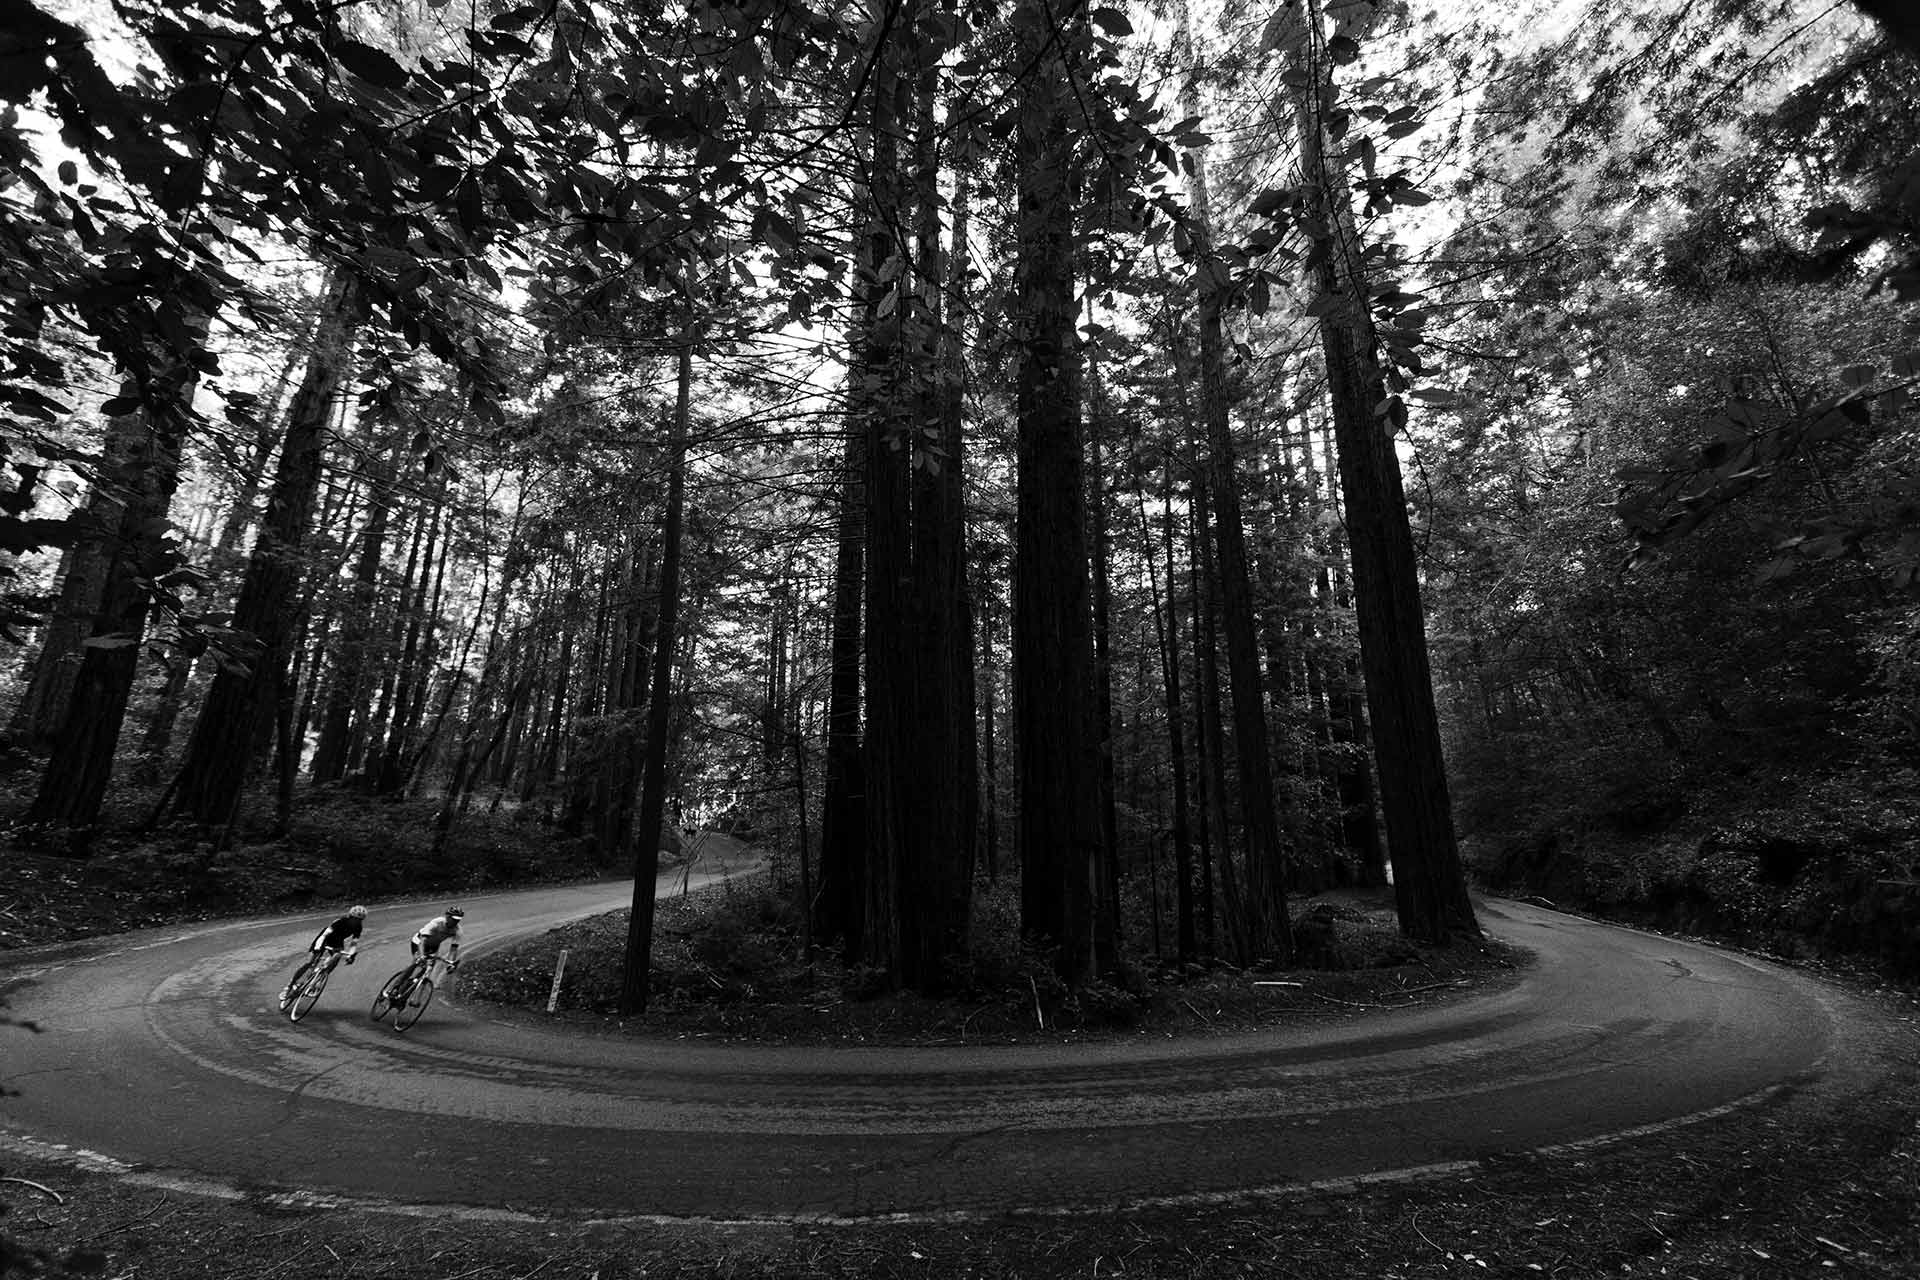 Bikers in a forest